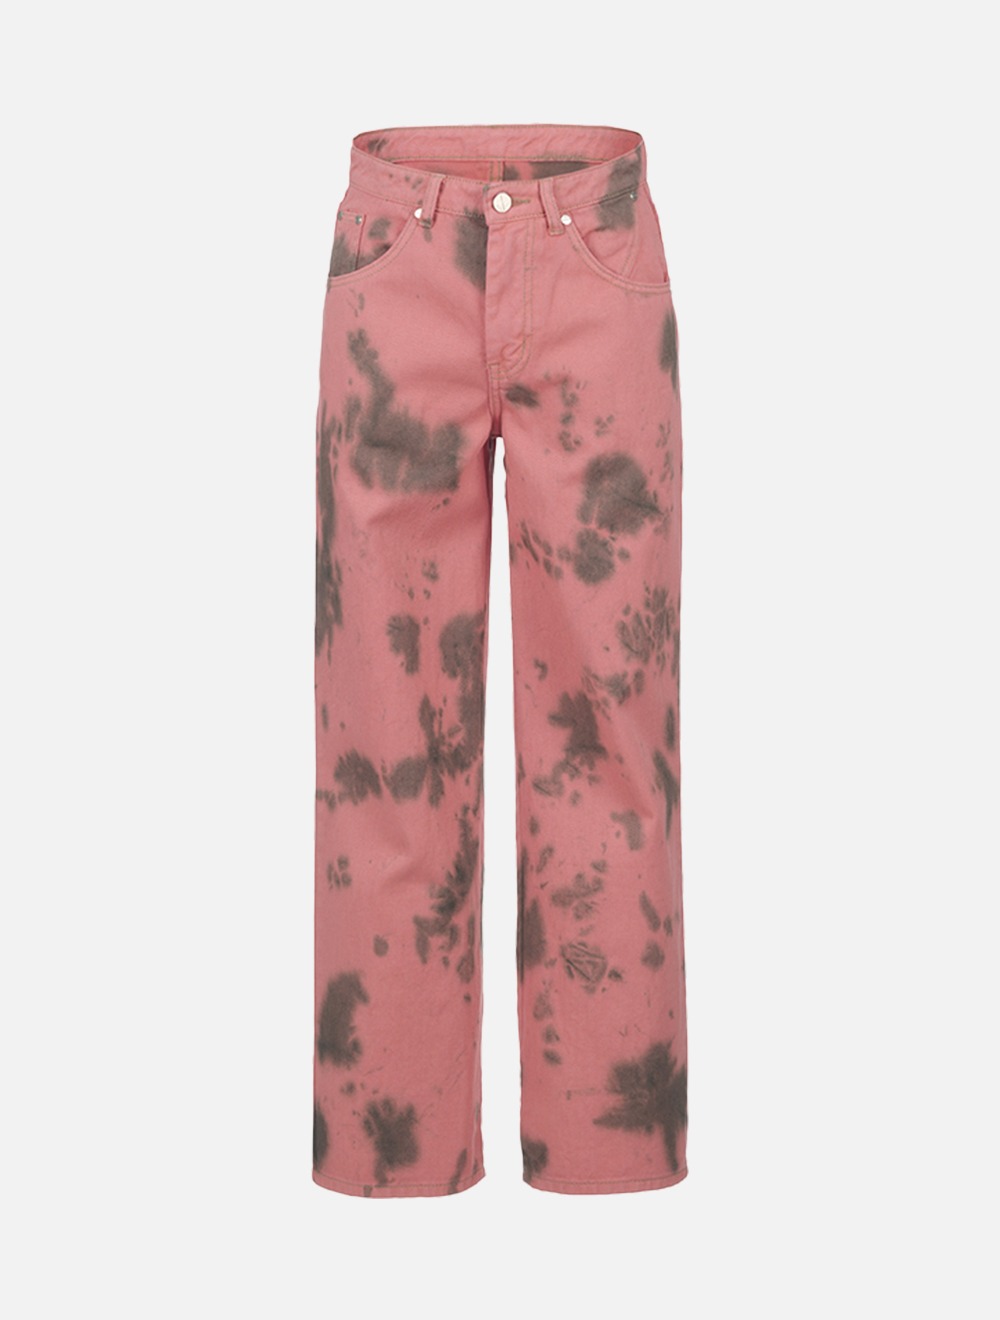 HAND DYED PANTS PINK